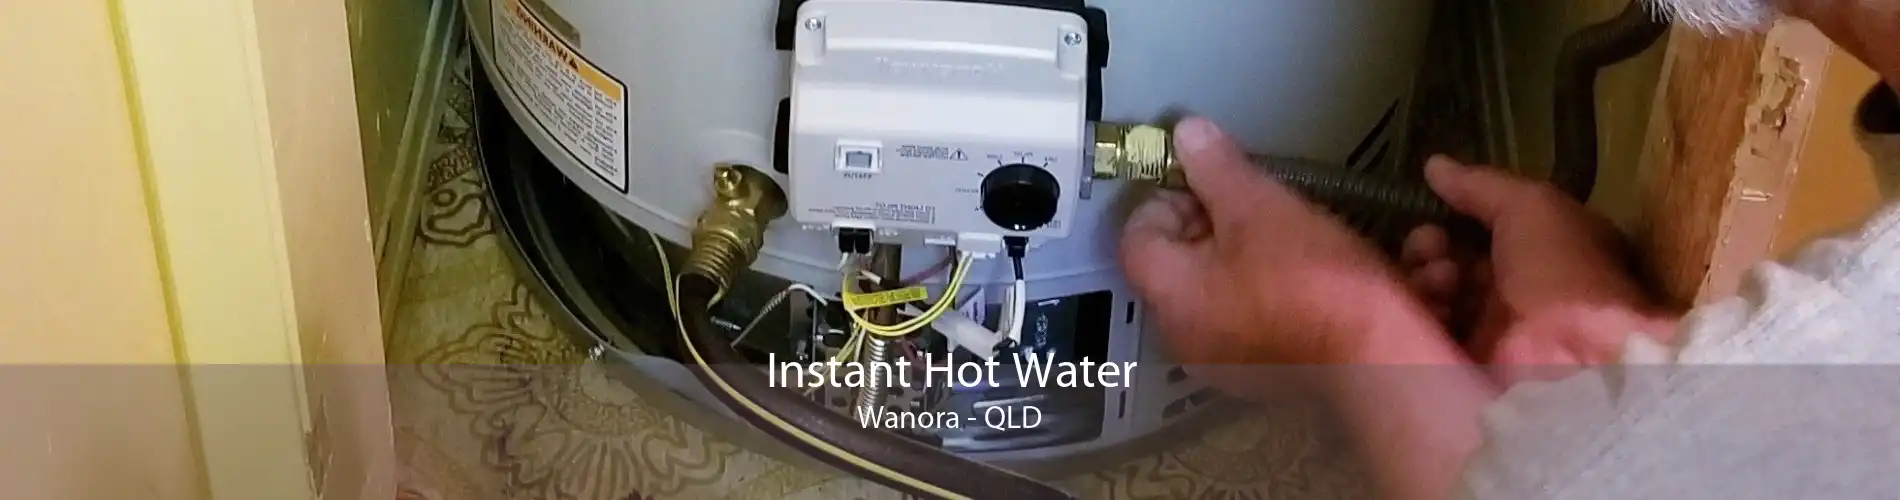 Instant Hot Water Wanora - QLD